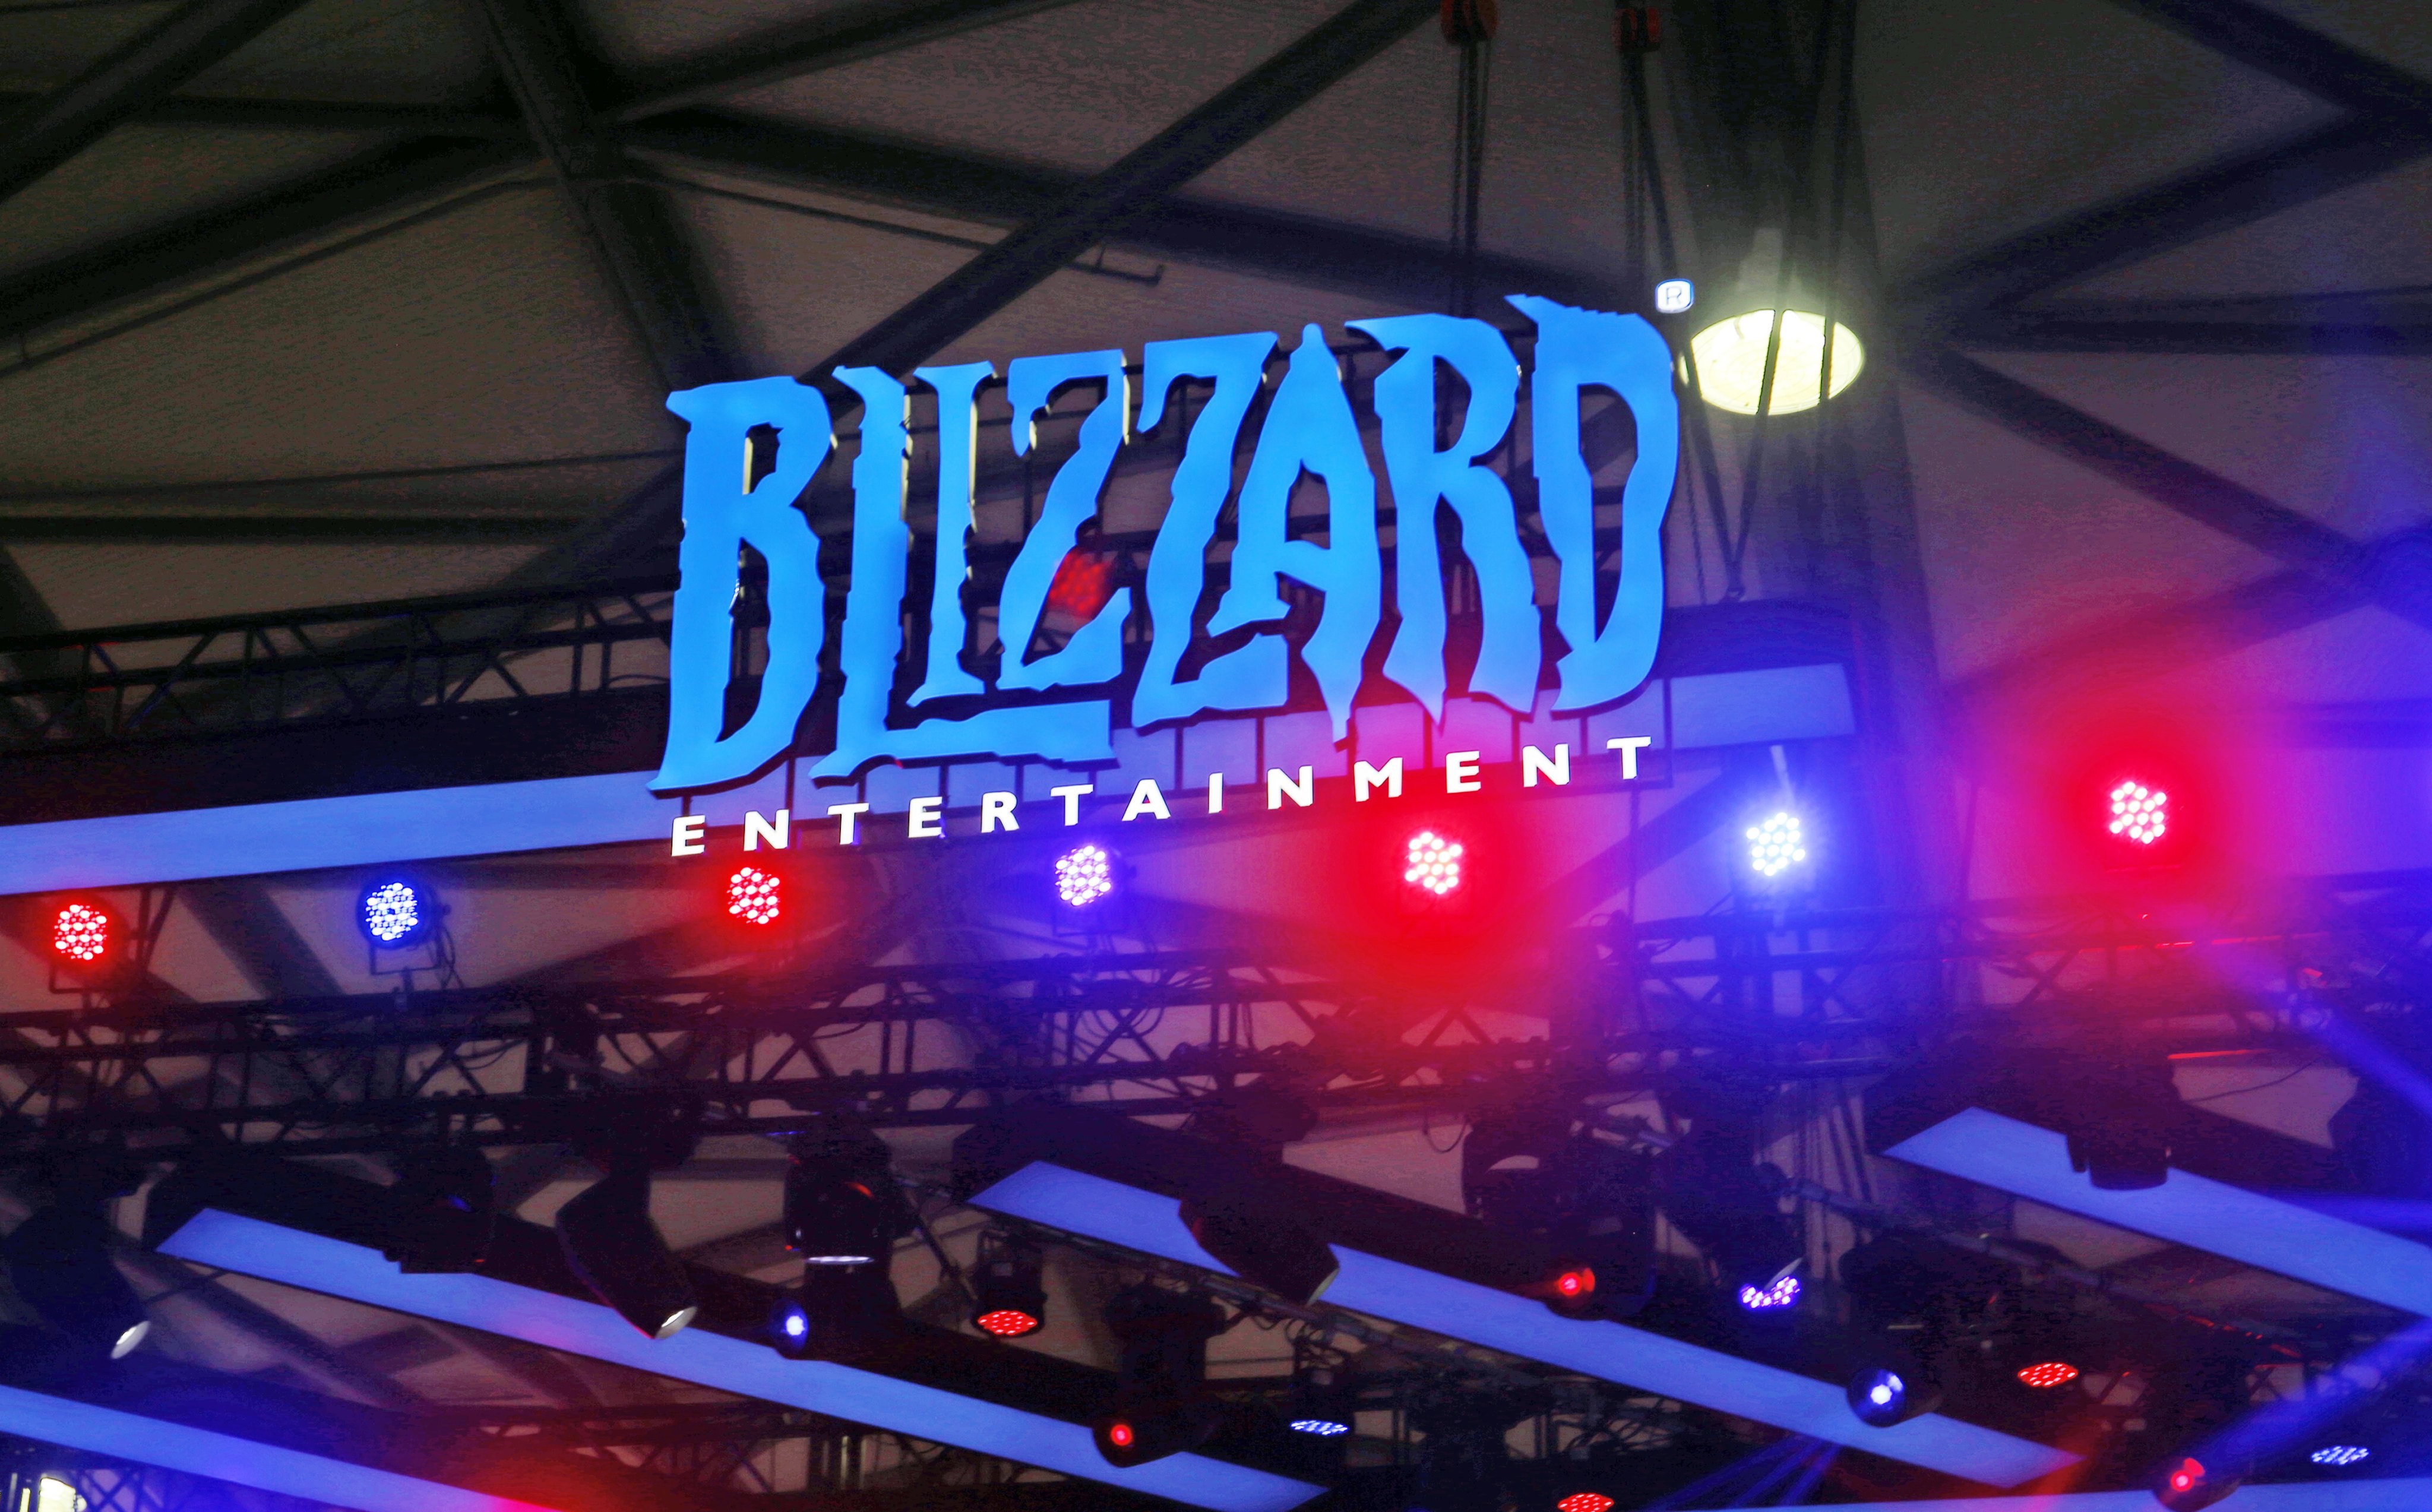 The Blizzard Entertainment booth at the Chinajoy Expo in Shanghai, China, August 2, 2019. Photo: CFOTO/Future Publishing via Getty Images